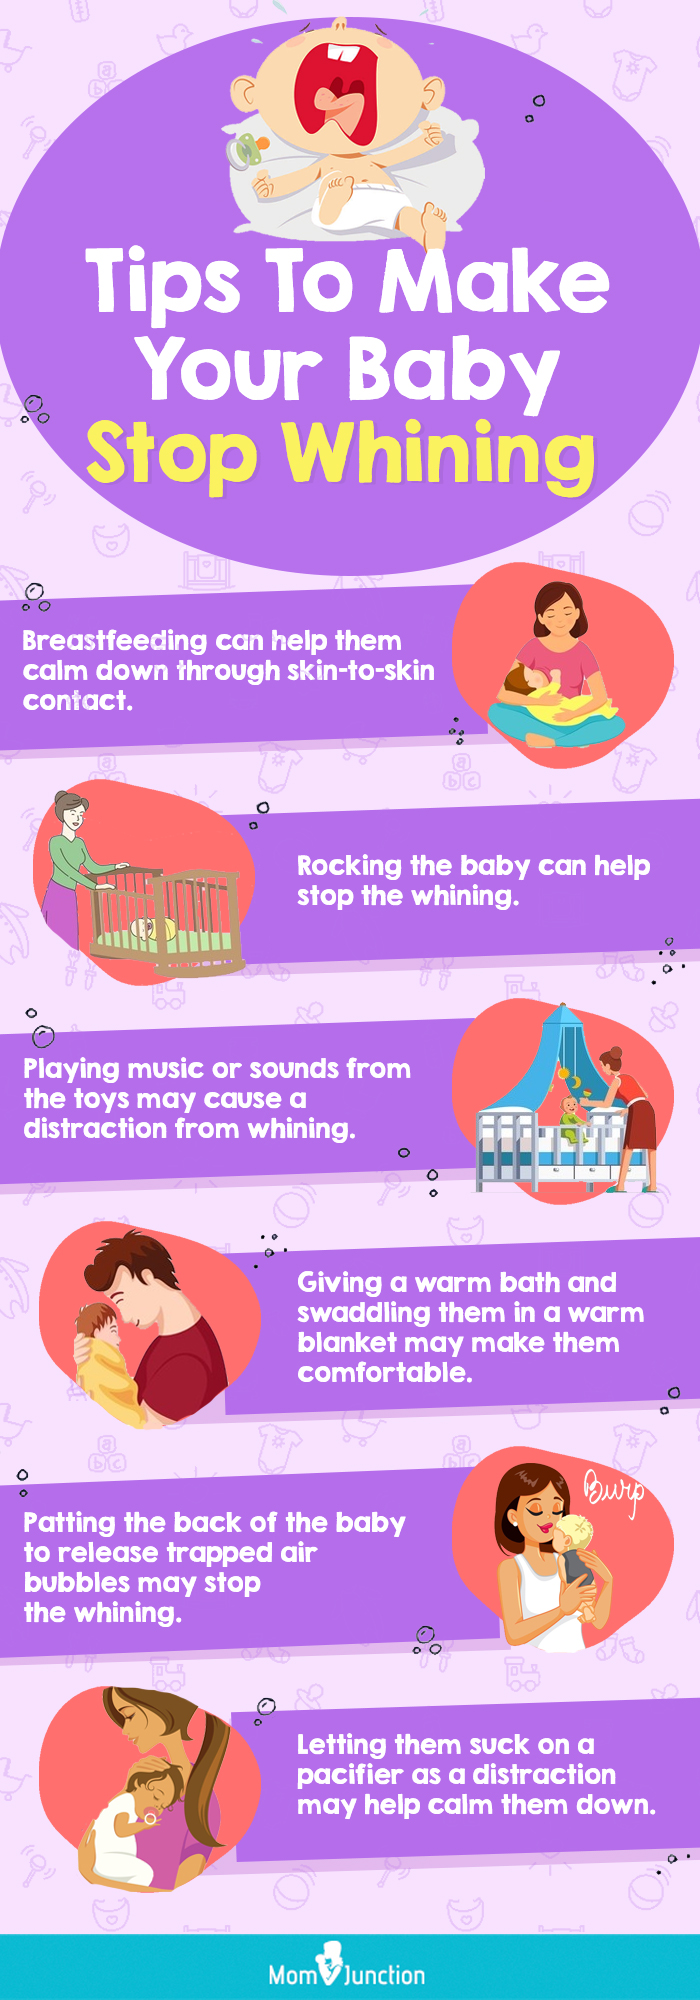 tips to make your baby stop whining (infographic)